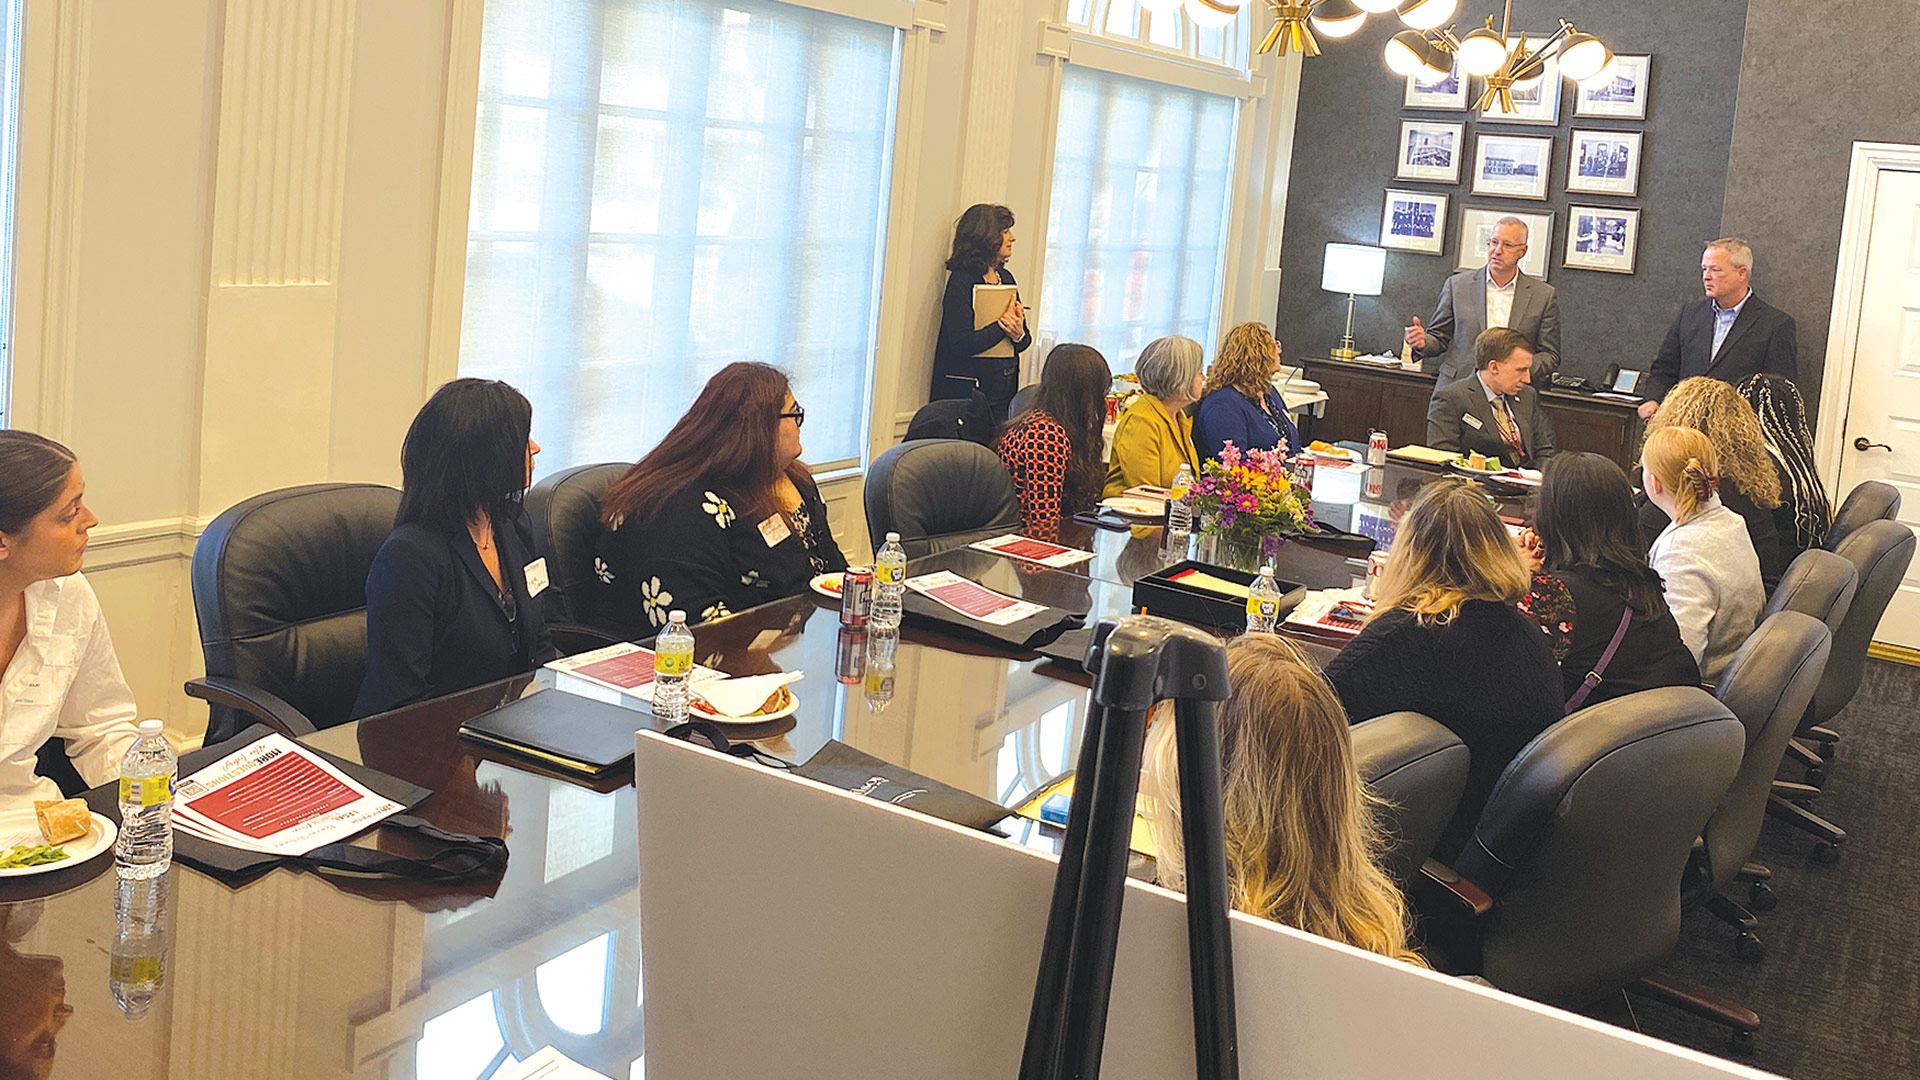 The women of Bacon Wilson who graduated from Bay Path shared how their individual journeys led each of them down a different path to the firm.